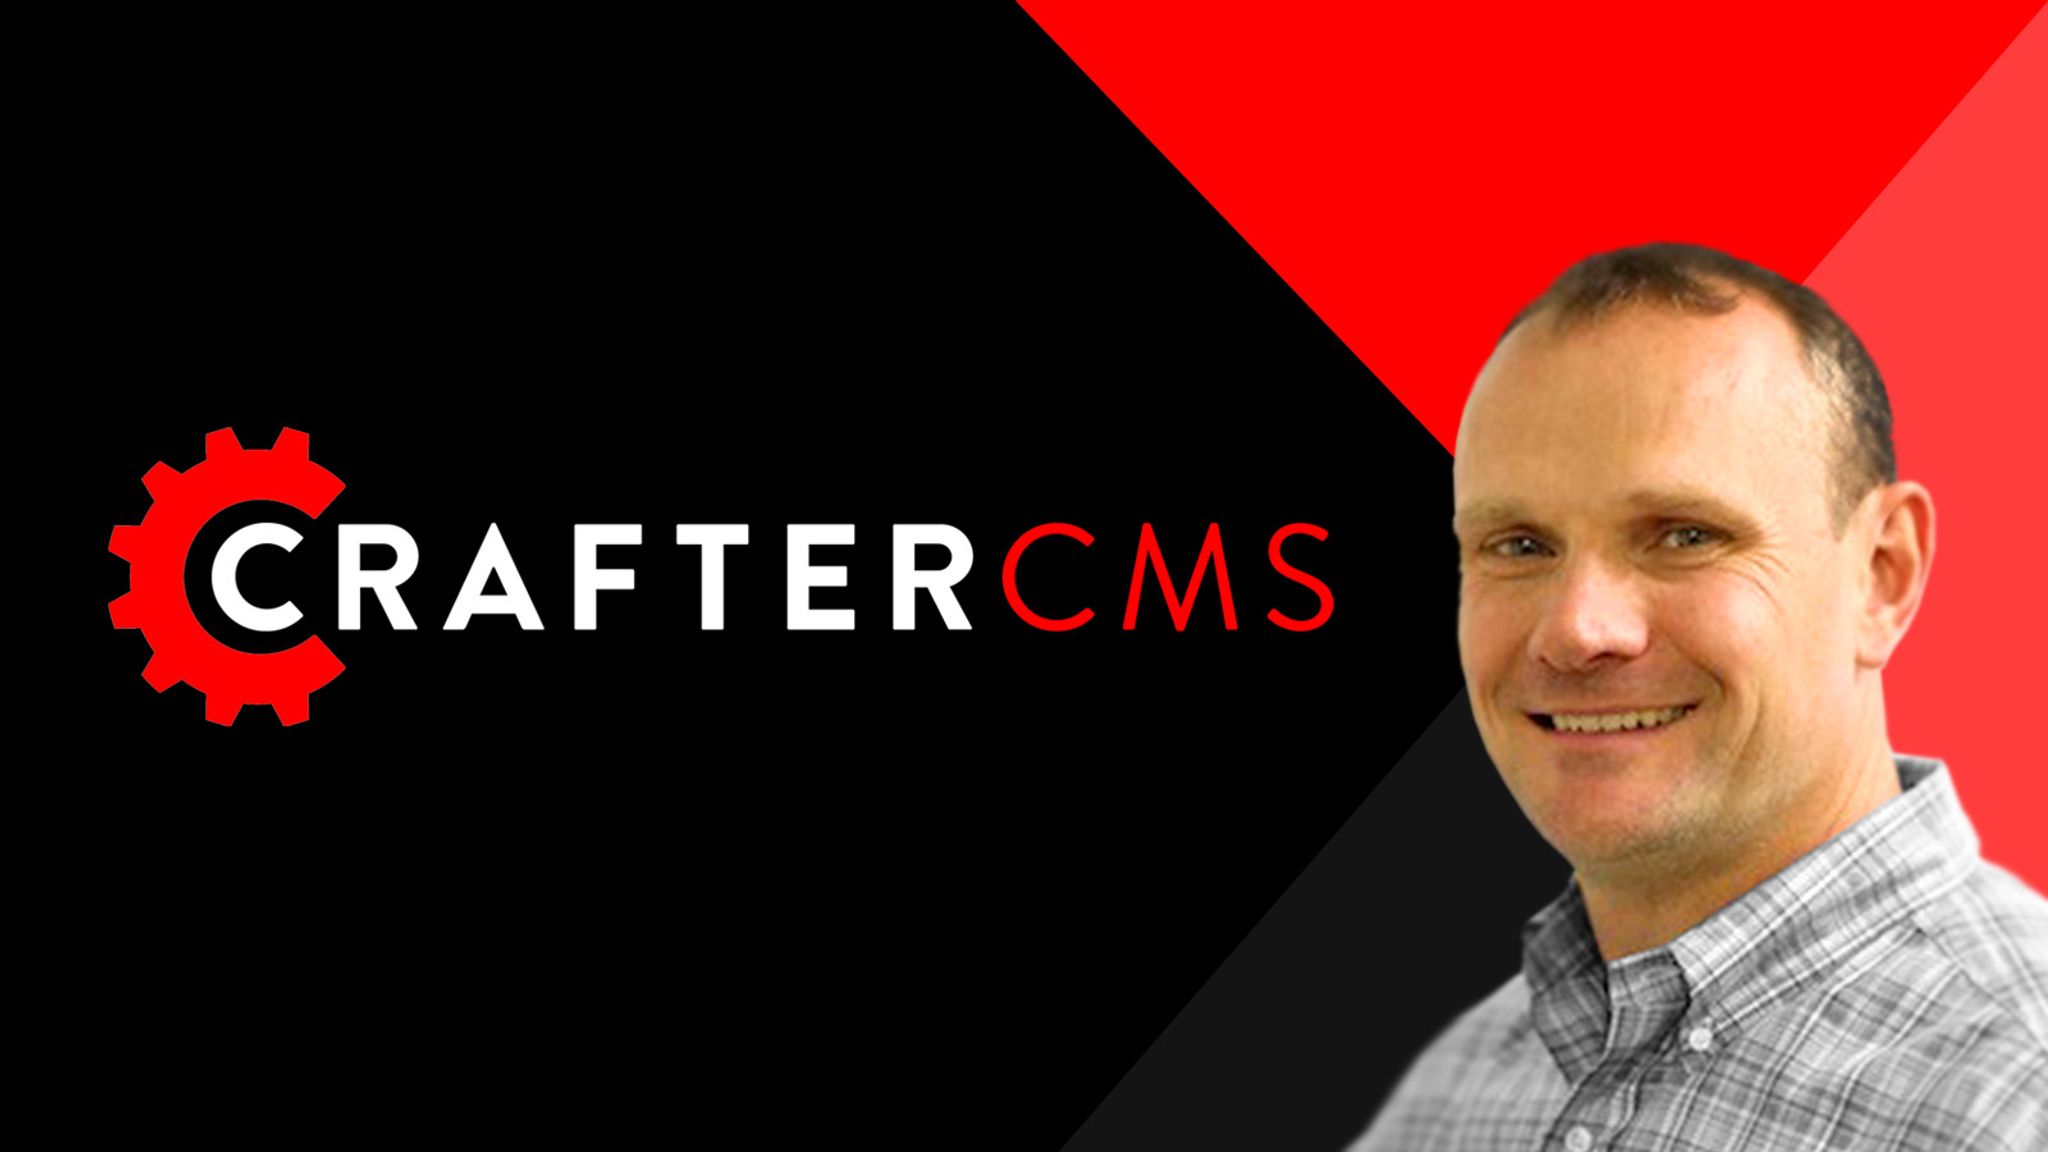 Featured post image of CrafterCMS logo with headshot of CEO Mike Vertal